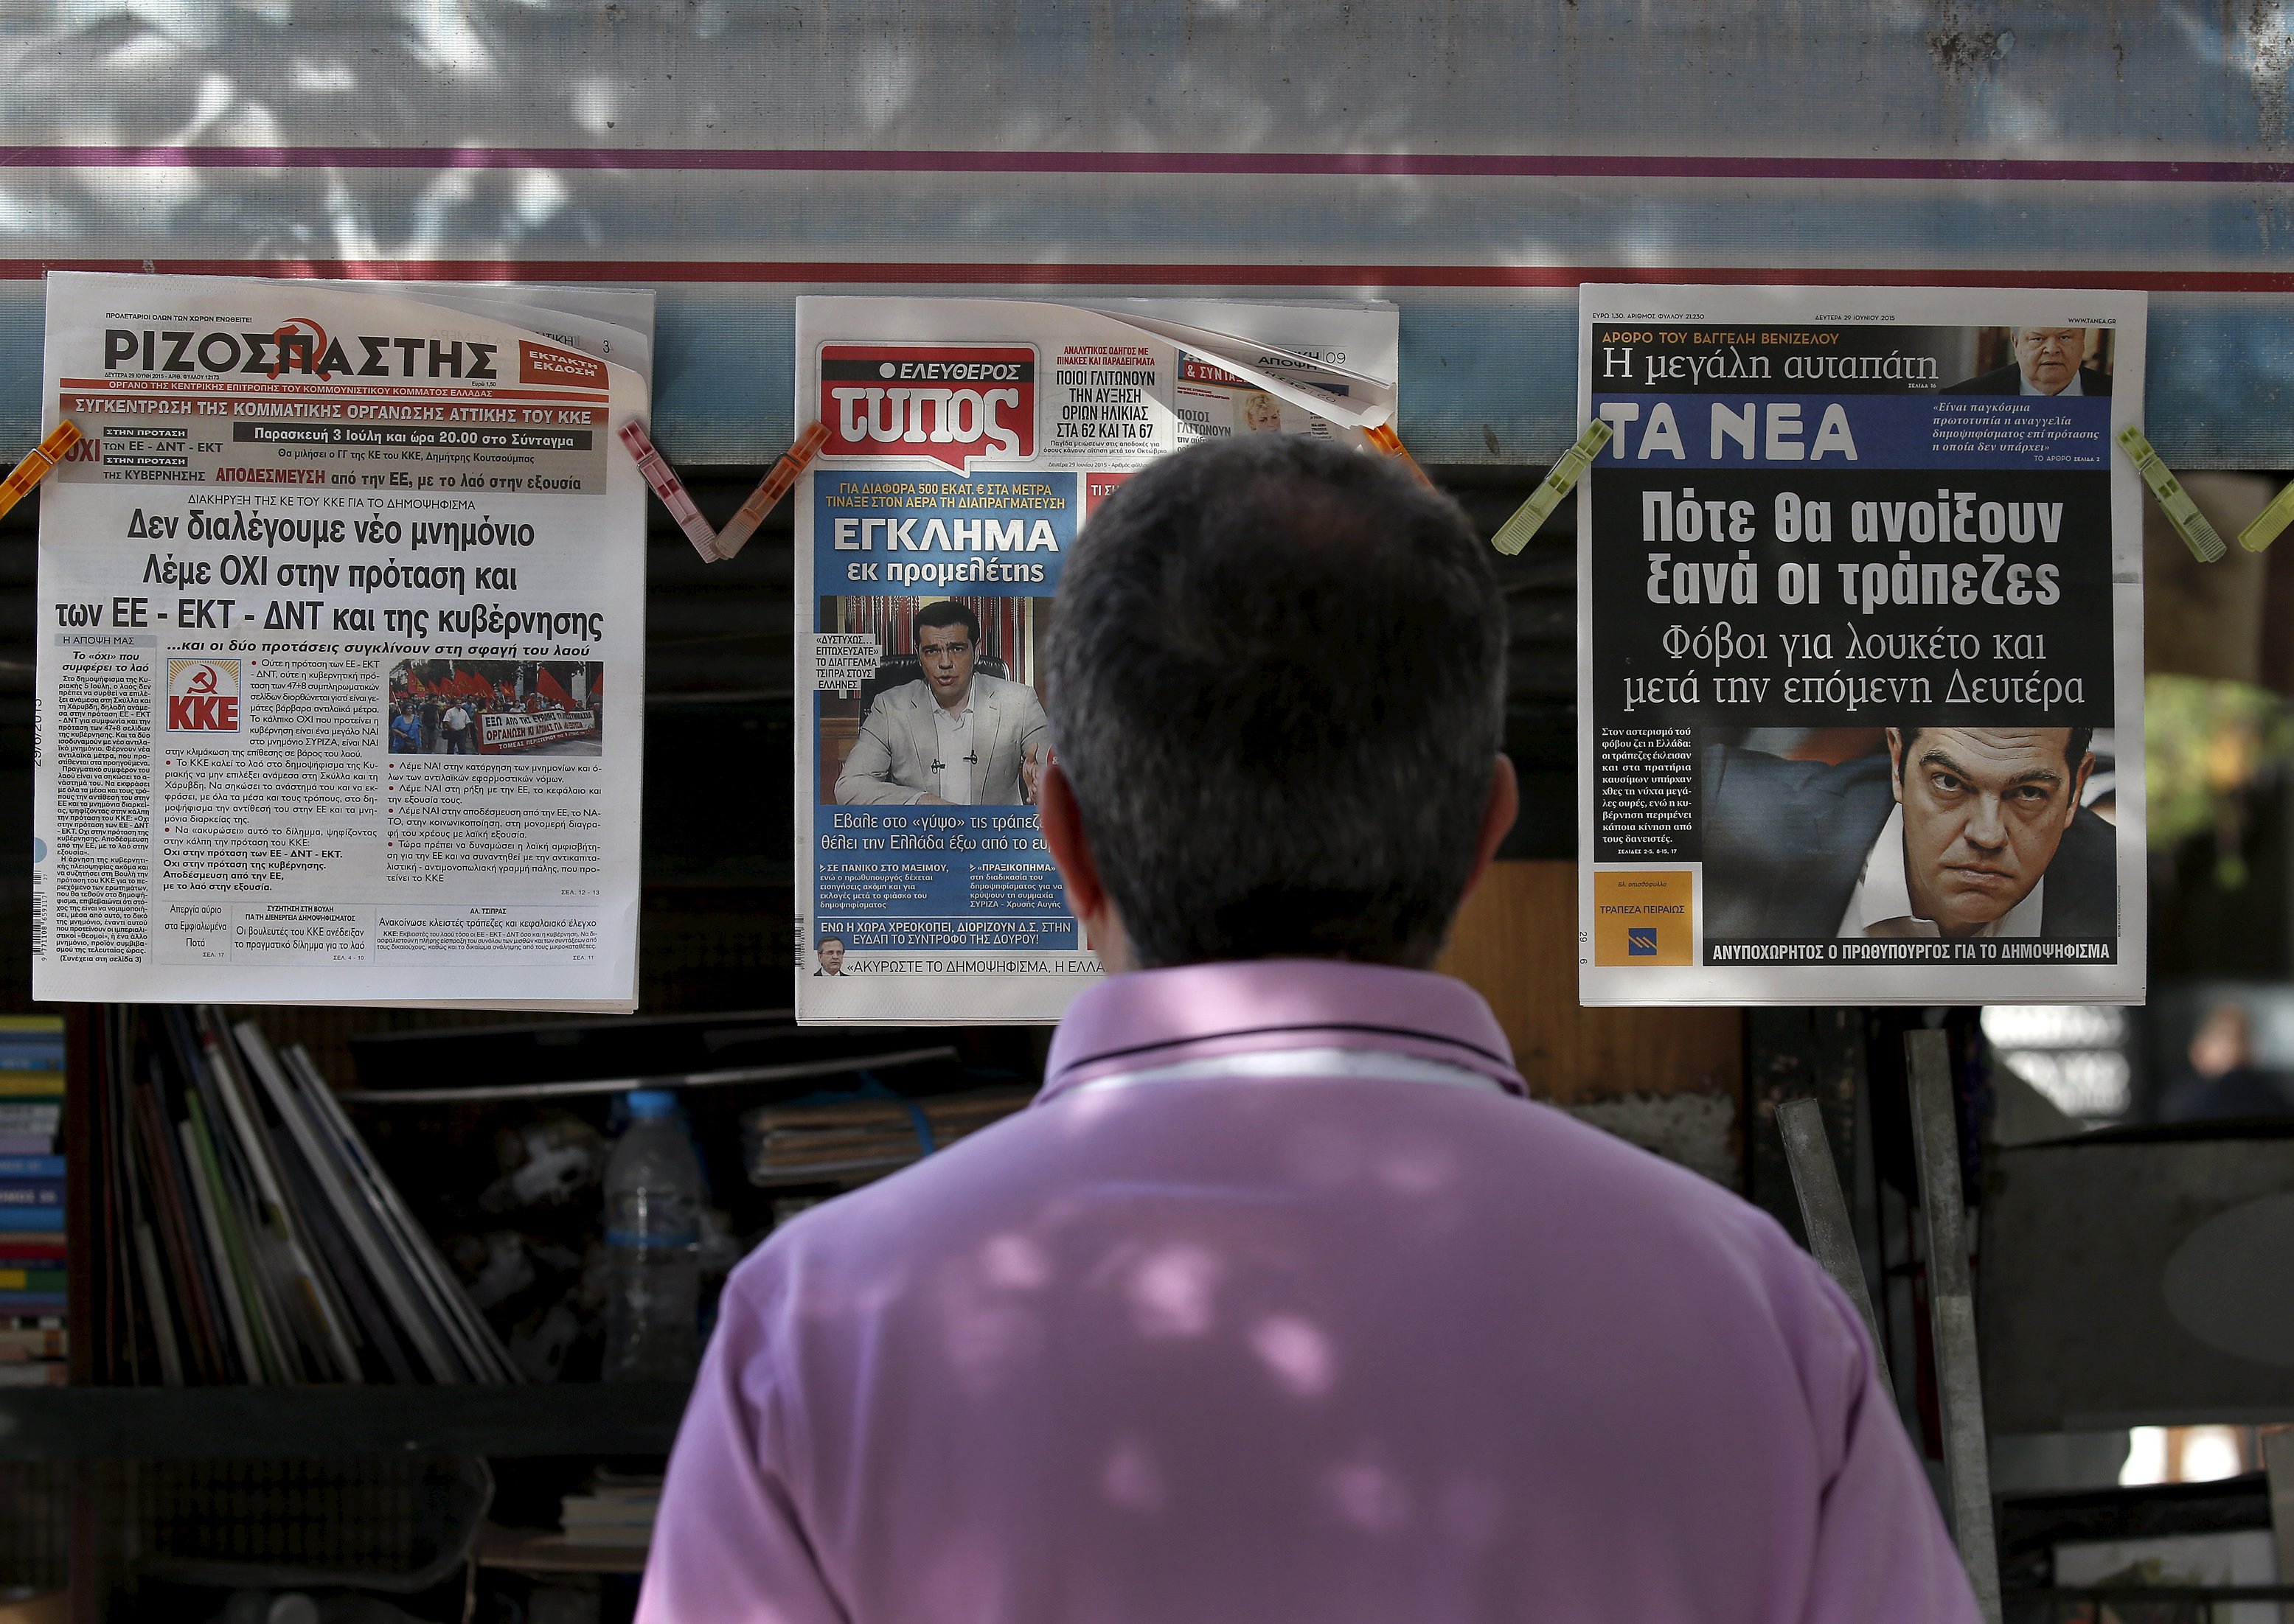 A man reads the front pages of various newspapers hanging at a kiosk in Athens, Greece June 29, 2015. Greece closed its banks and imposed capital controls on Sunday to check the growing strains on its crippled financial system, bringing the prospect of being forced out of the euro into plain sight. REUTERS/Yannis Behrakis